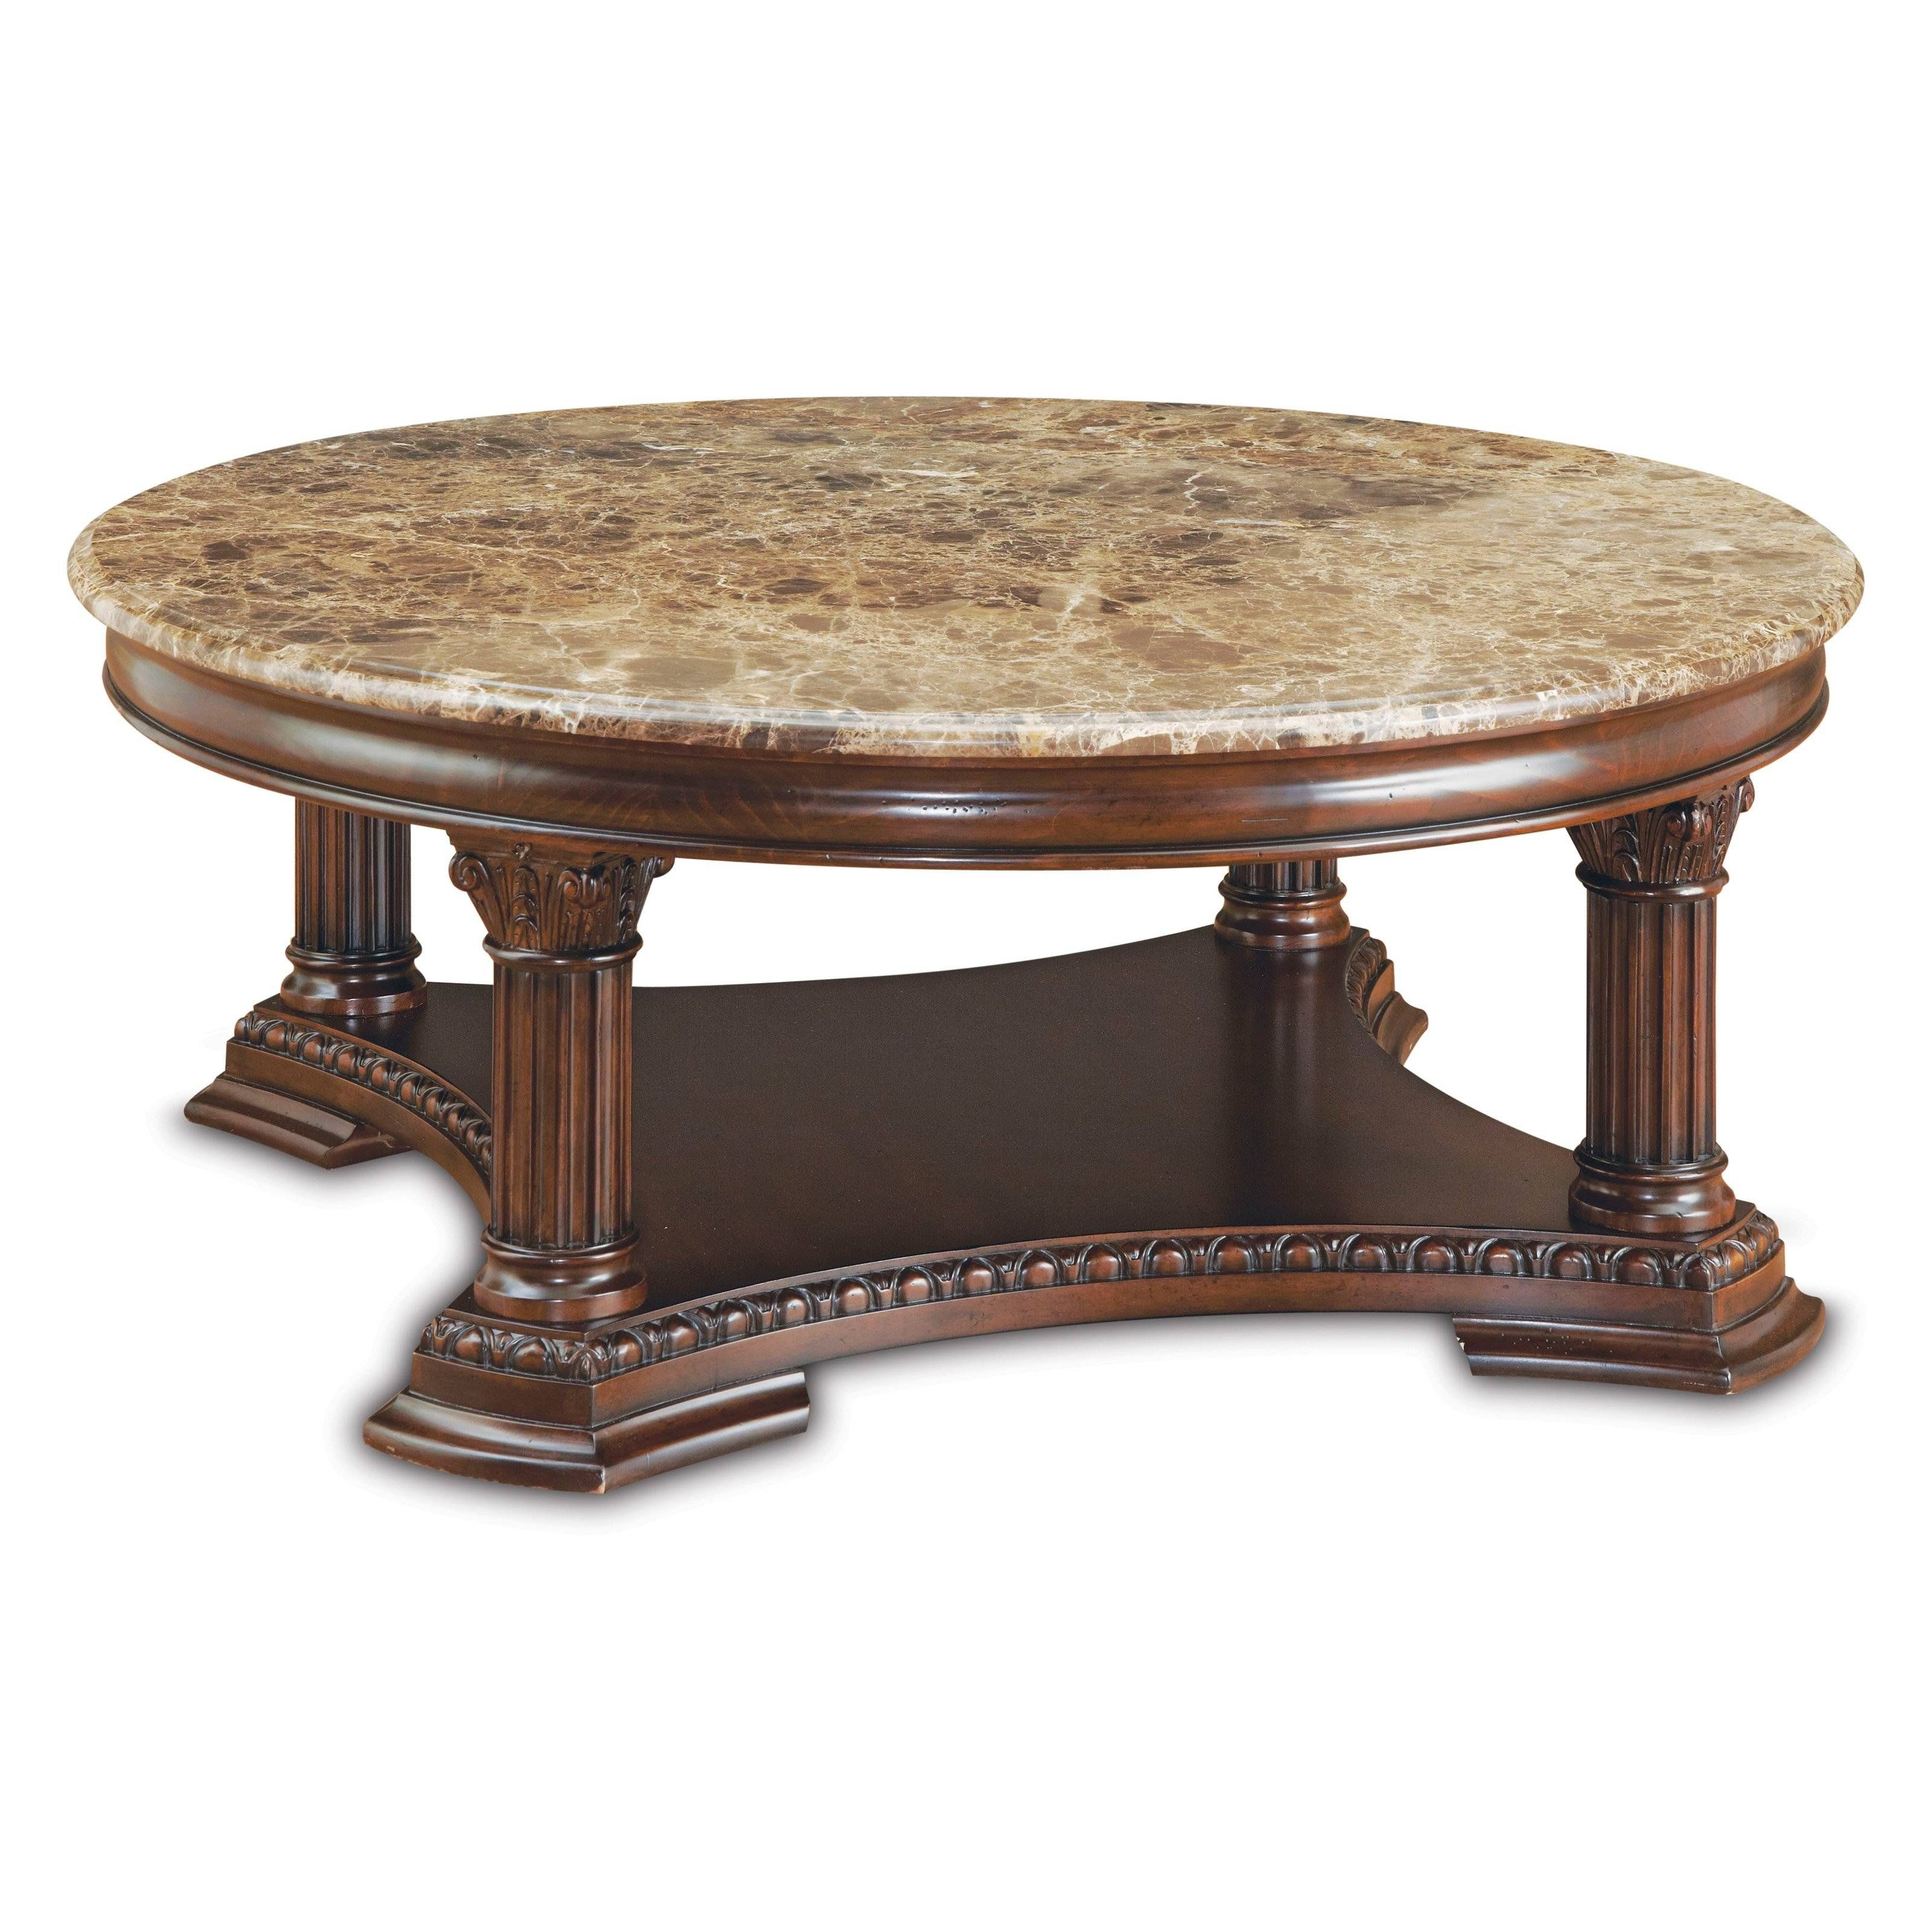 Cool Of Stone Top Coffee Table – Granite Coffee Table Top, Stone In Round Slate Top Coffee Tables (View 6 of 30)